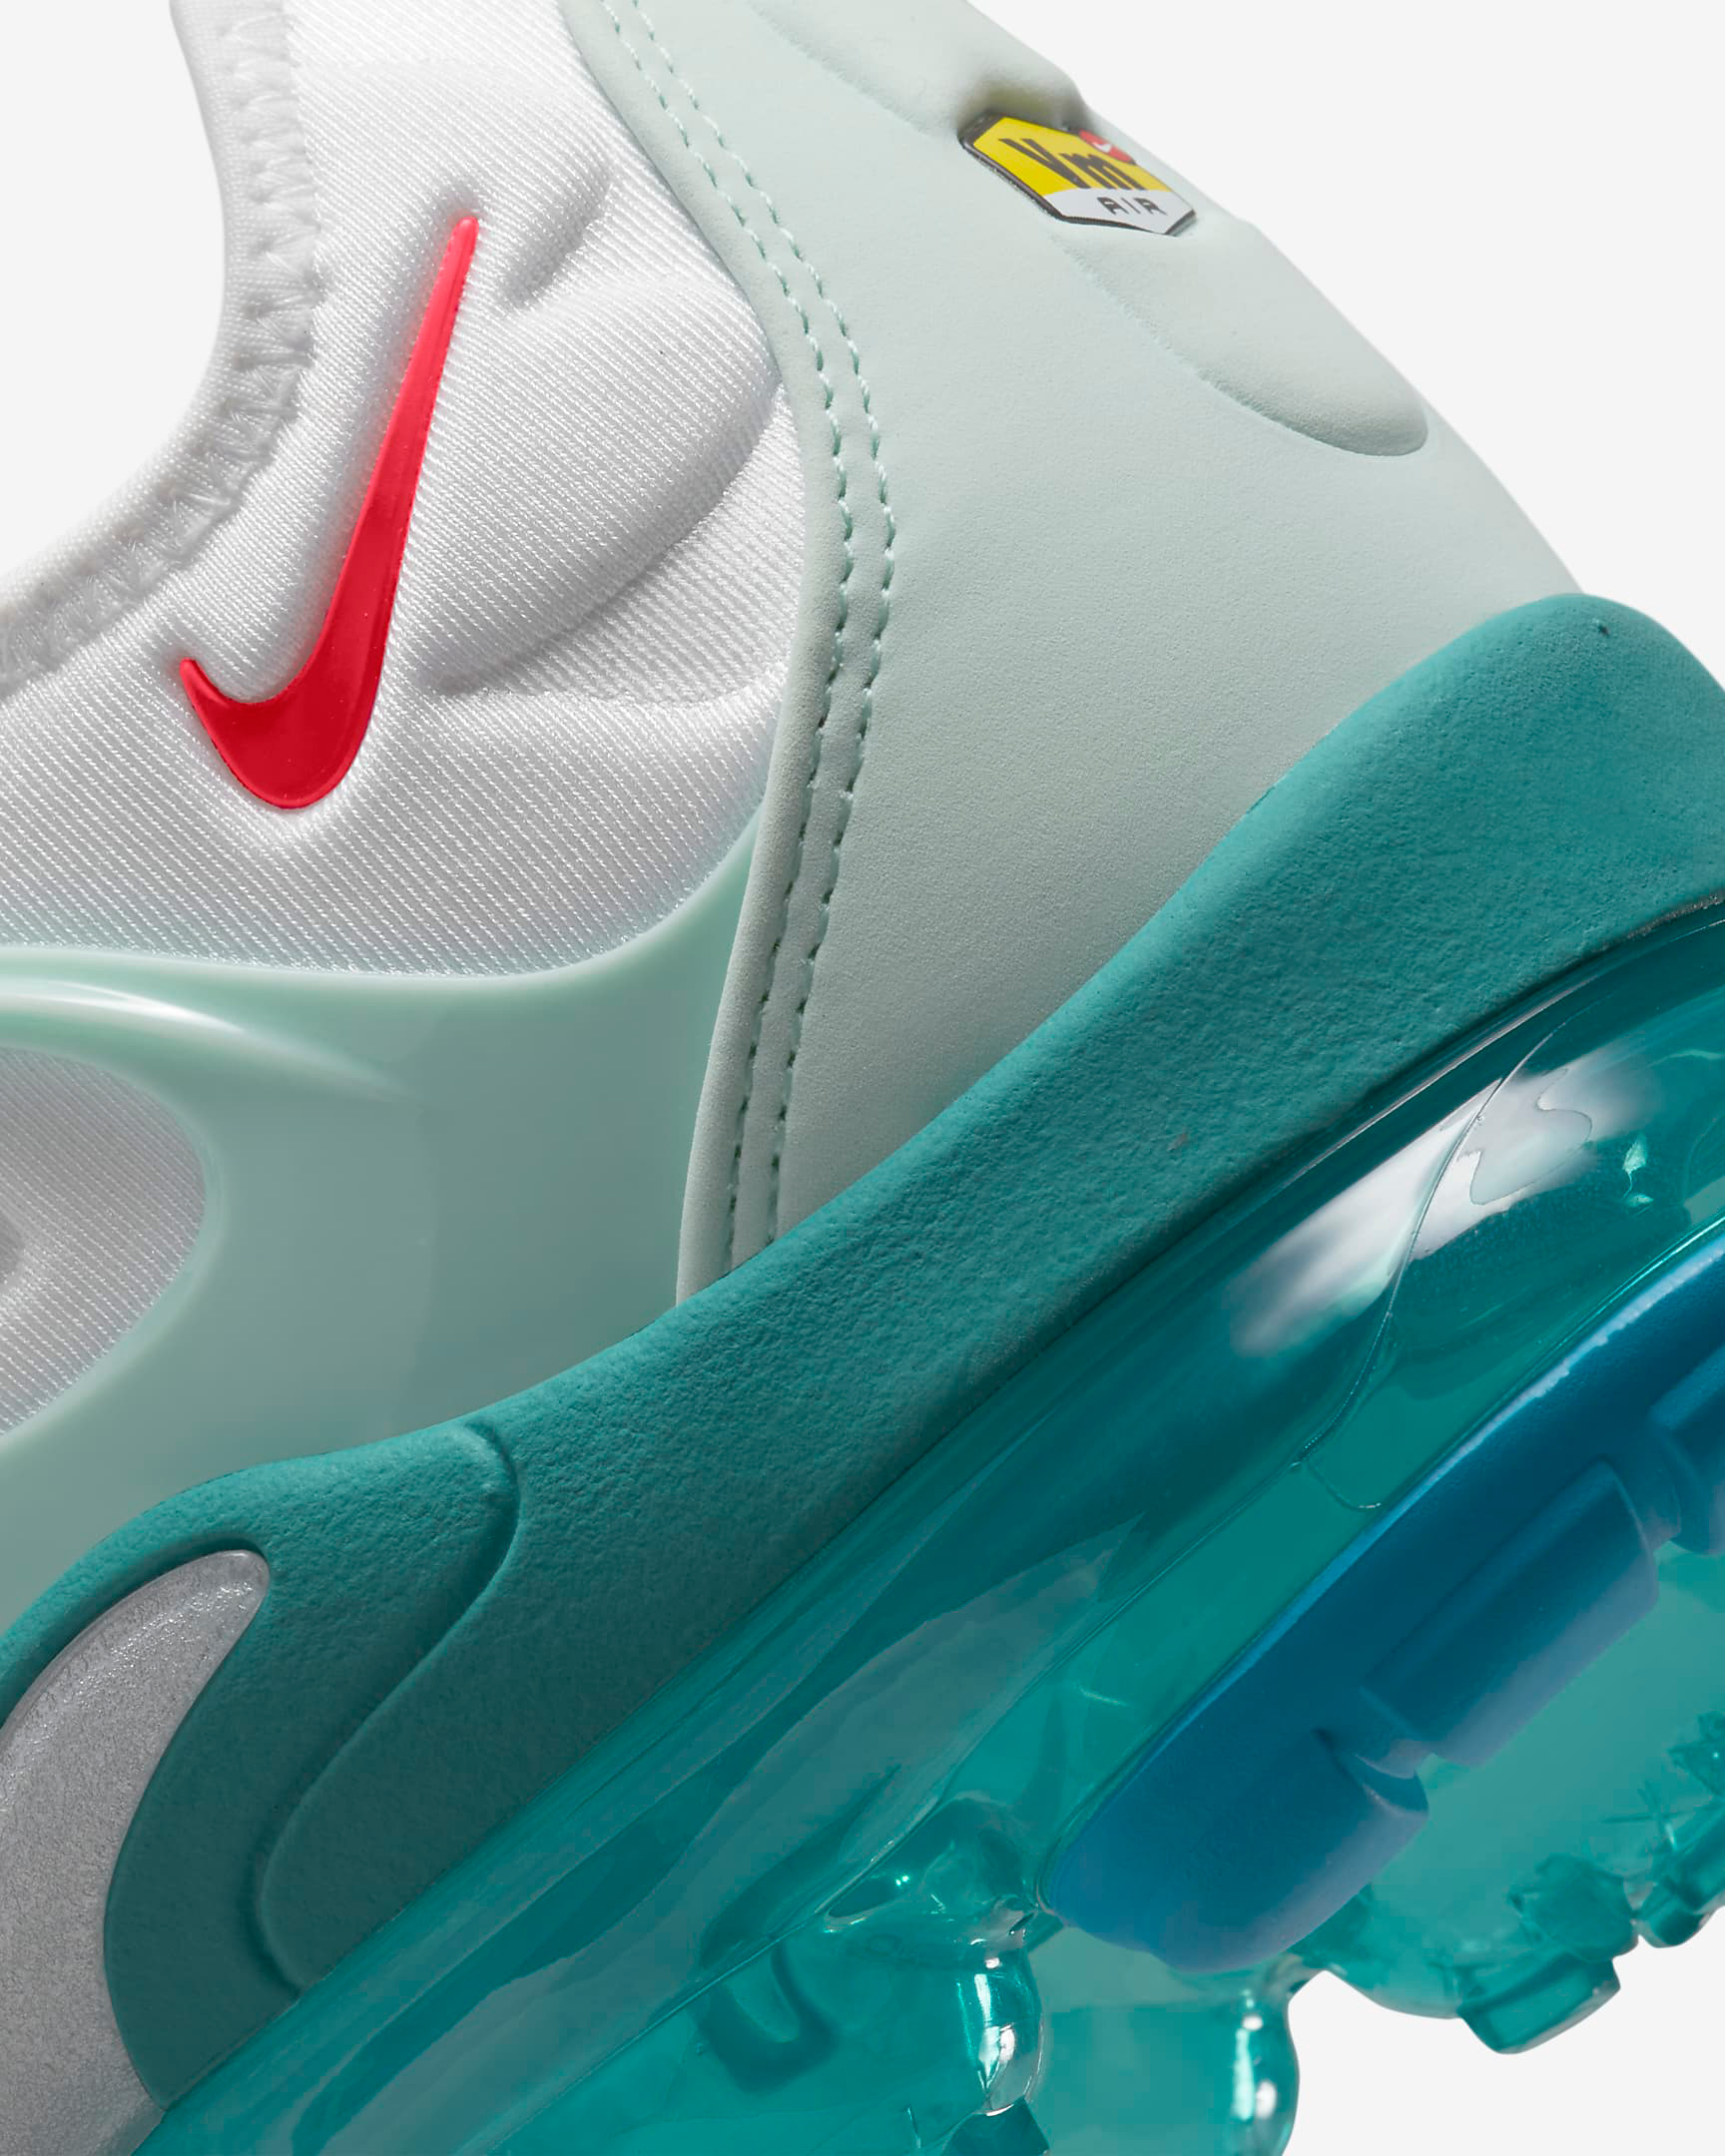 nike-air-vapormax-plus-white-mint-foam-washed-teal-siren-red-7